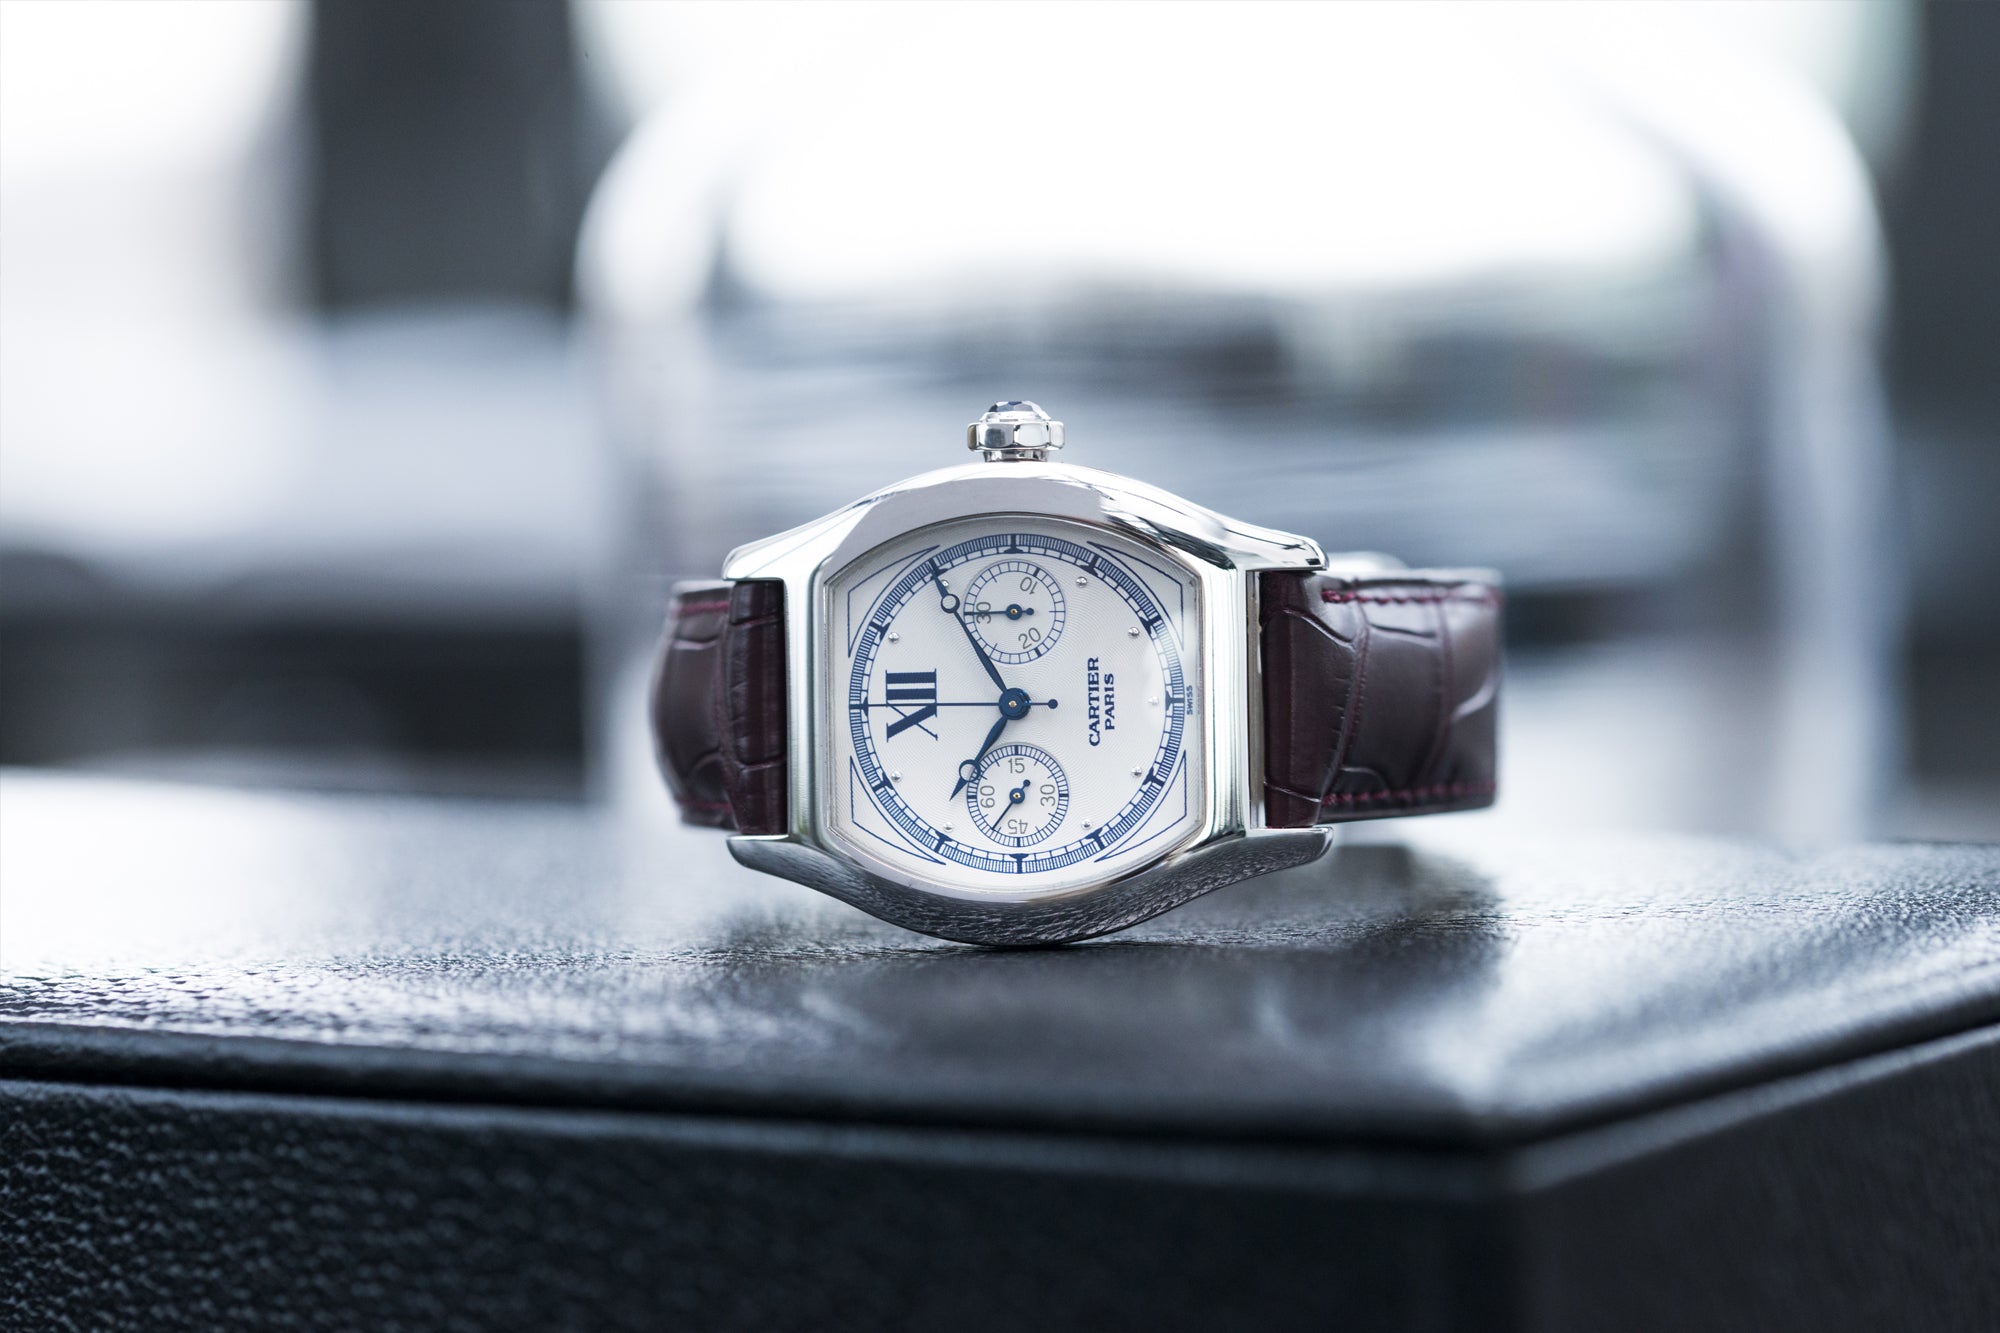 Cartier Monopusher Monopoussoir ref. 2396 white gold dress watch with THA ebauche for sale online at A Collected Man London UK specialist of rare watches